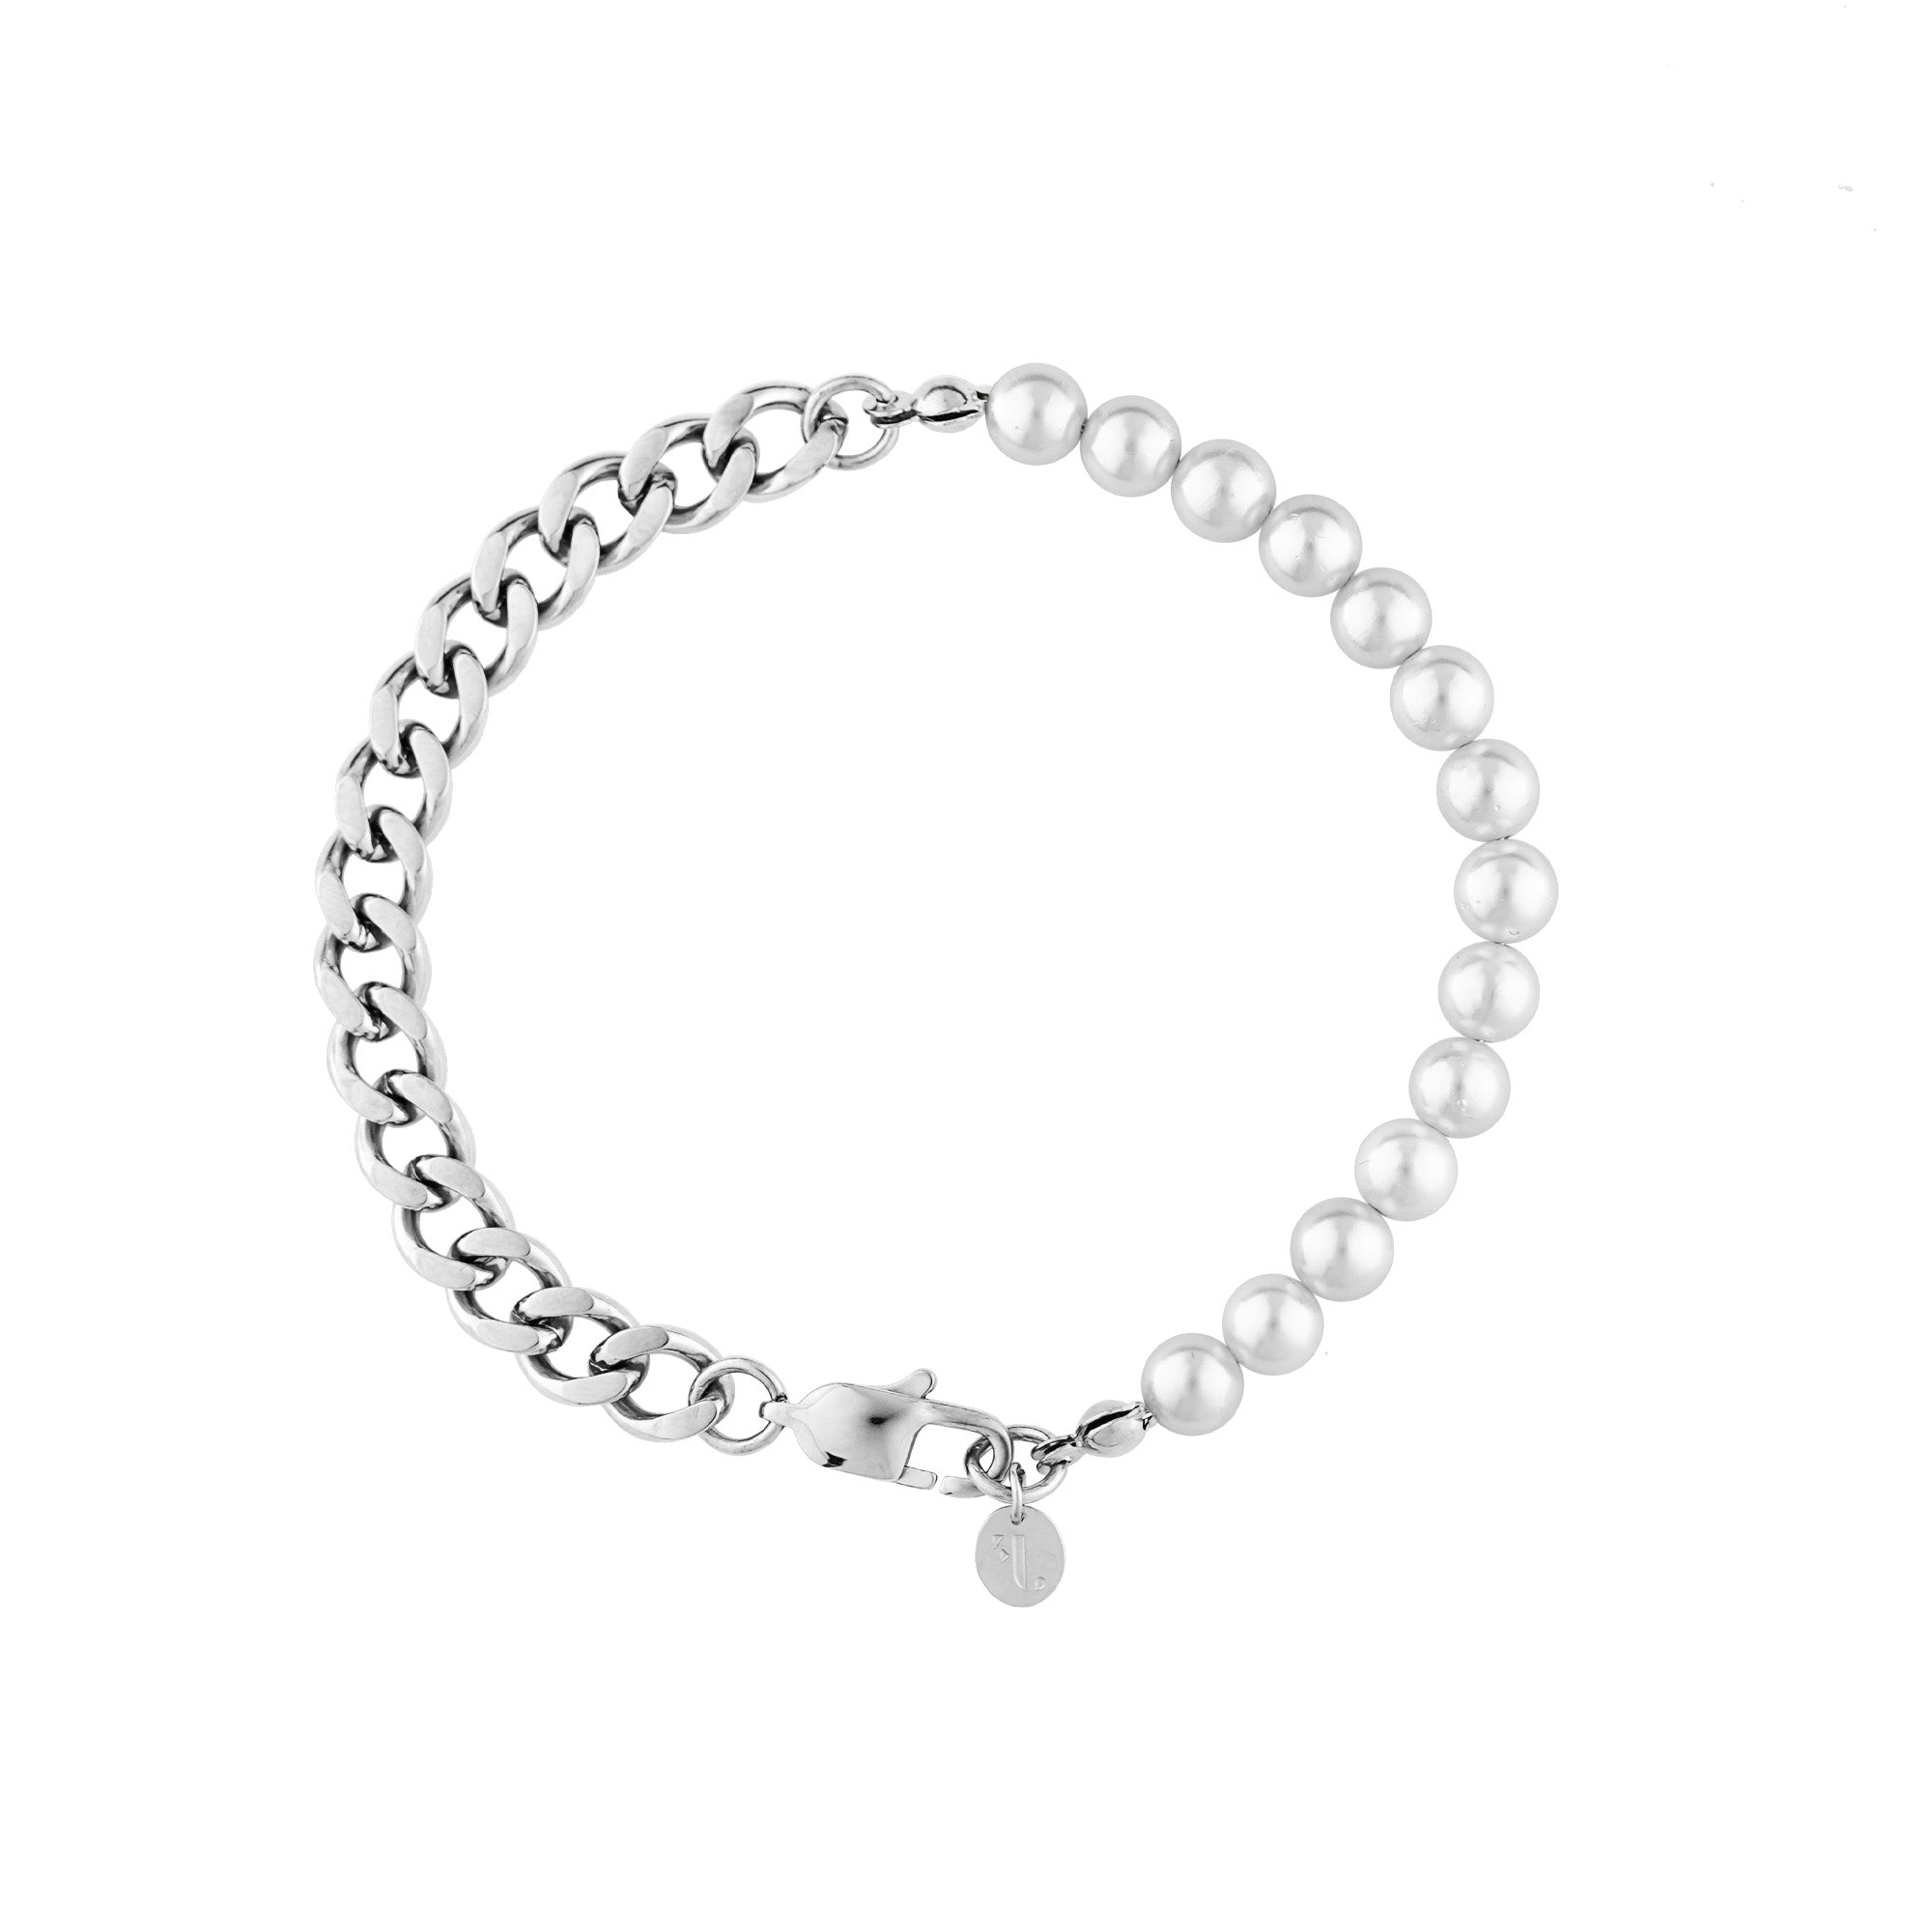 Volga men's bracelet by Five Jwlry, uniquely crafted with a combination of half silver Cuban chain and half white pearls, measuring 20cm or 23cm in length. Made from water-resistant 316L stainless steel. Hypoallergenic with a 2-year warranty.